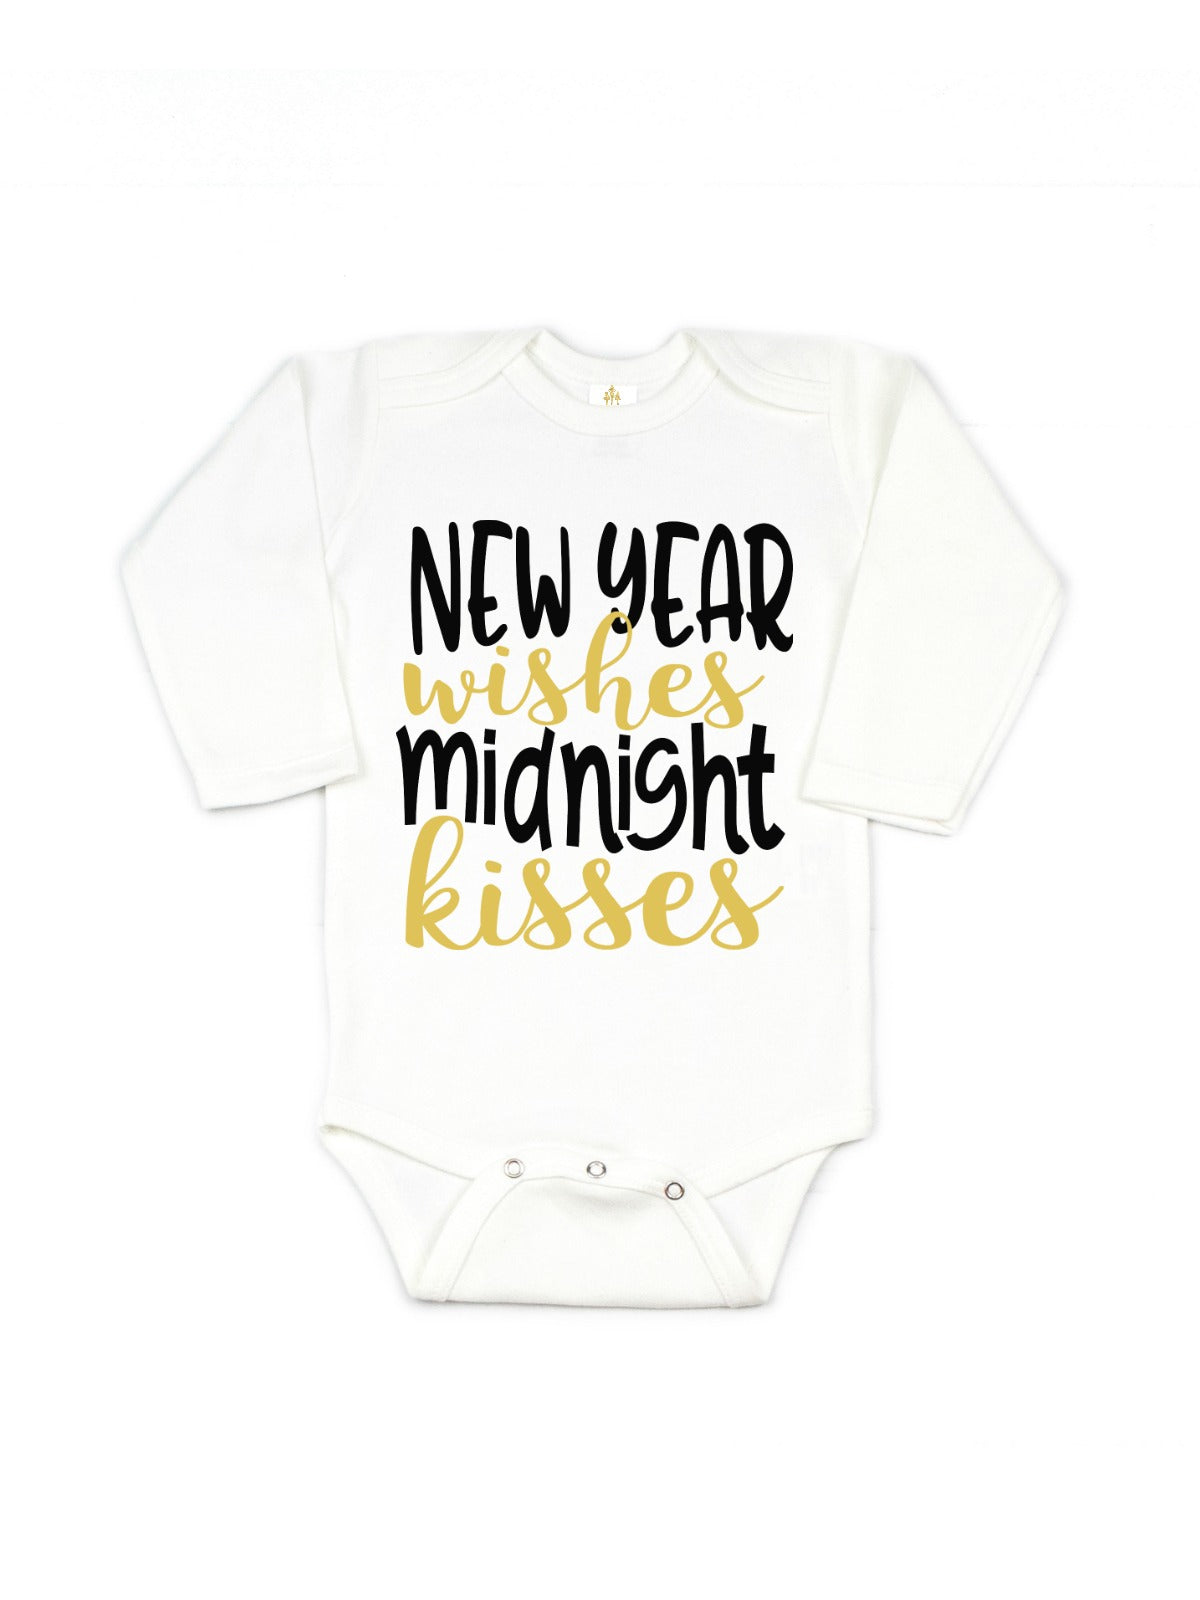 new year wishes midnight kisses baby bodysuit